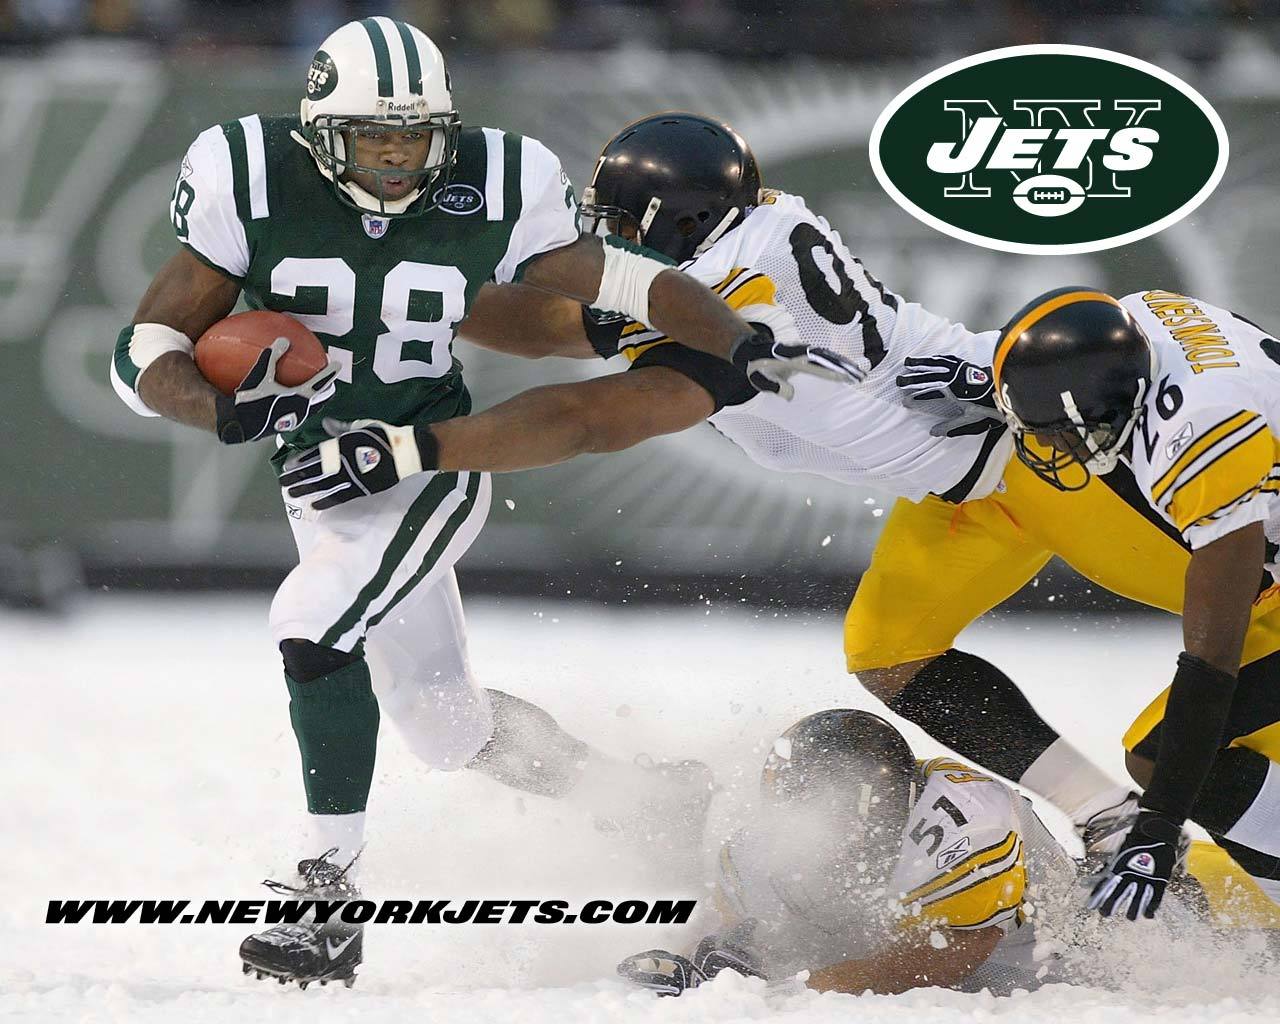 This Out Our New York Jets Wallpaper